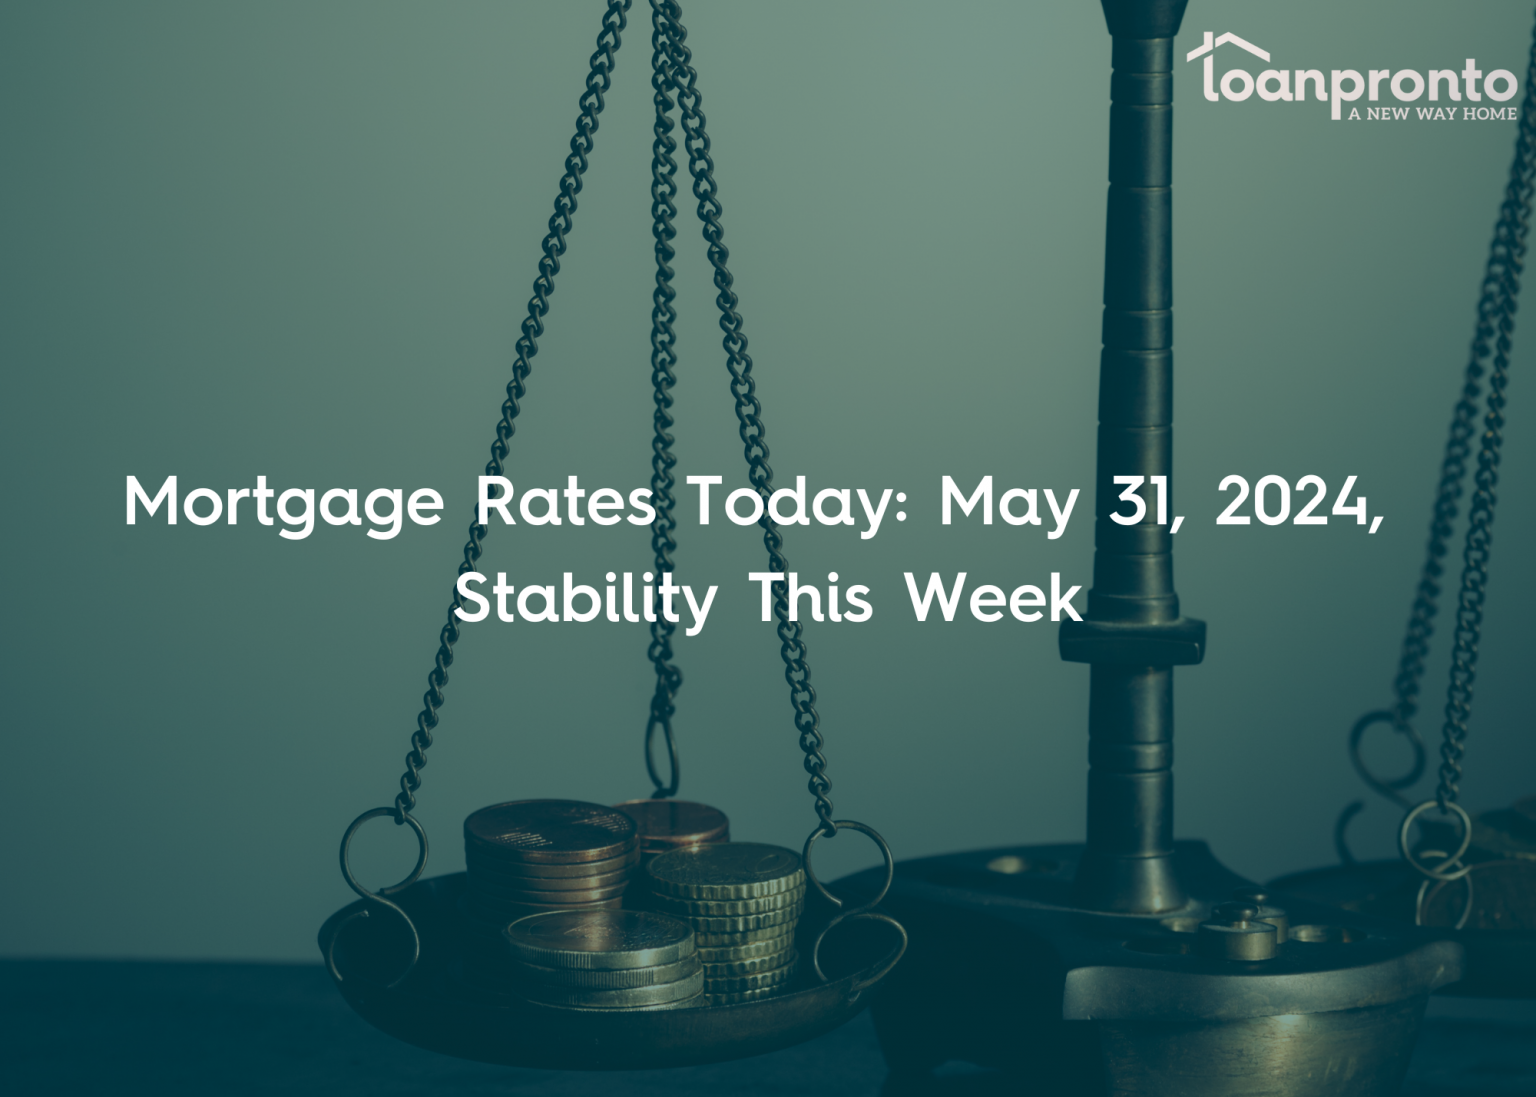 Rates are steady and the market remains stable with no major changes this week